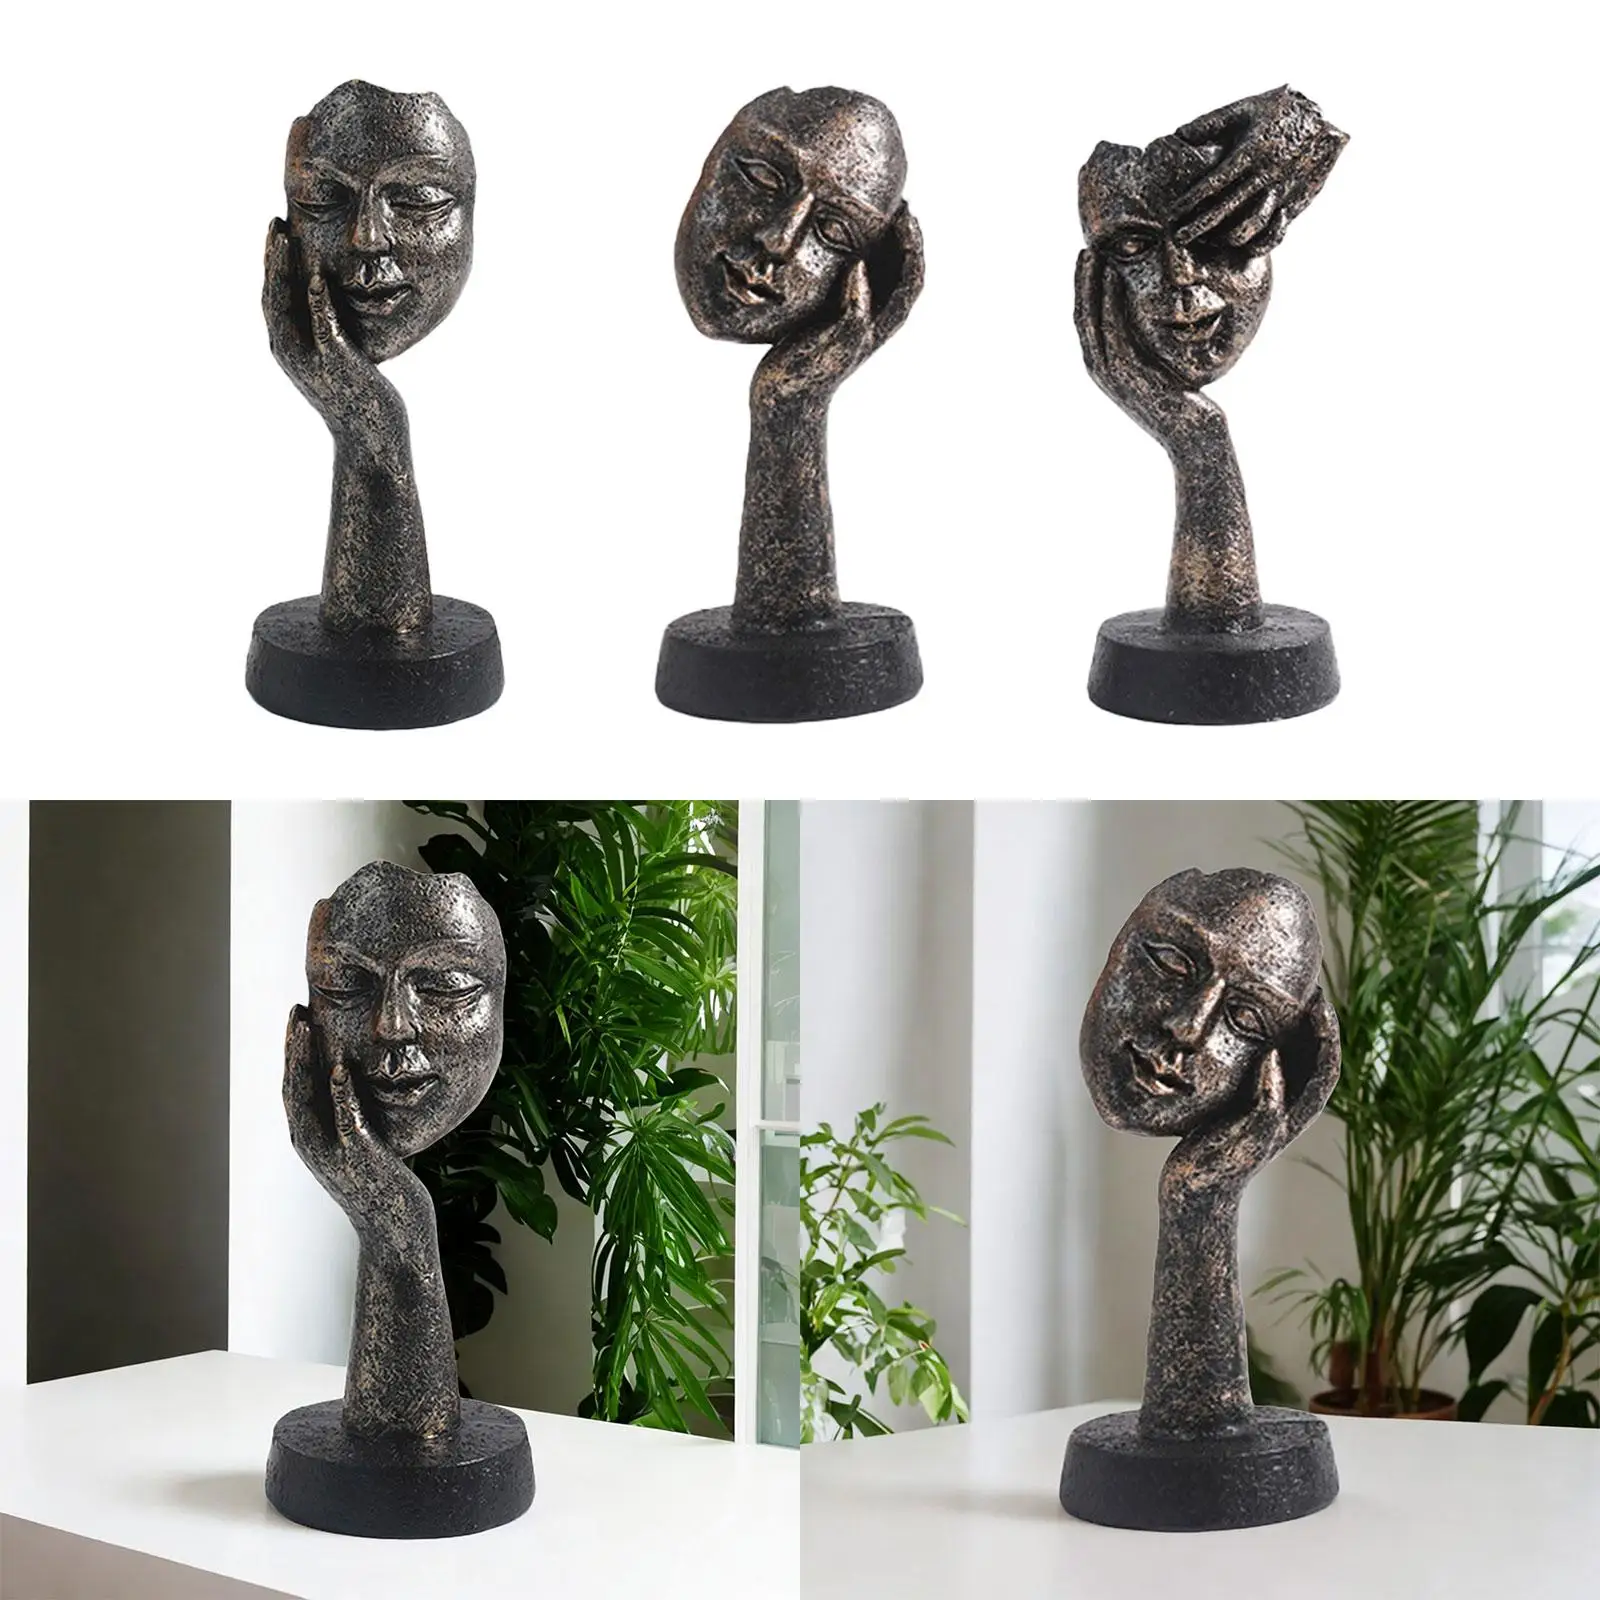 Face Sculpture Artworks Resin Modern Collectible Statue Abstract Figure Handicraft for Mantelpiece Bookcase Table Home Decor